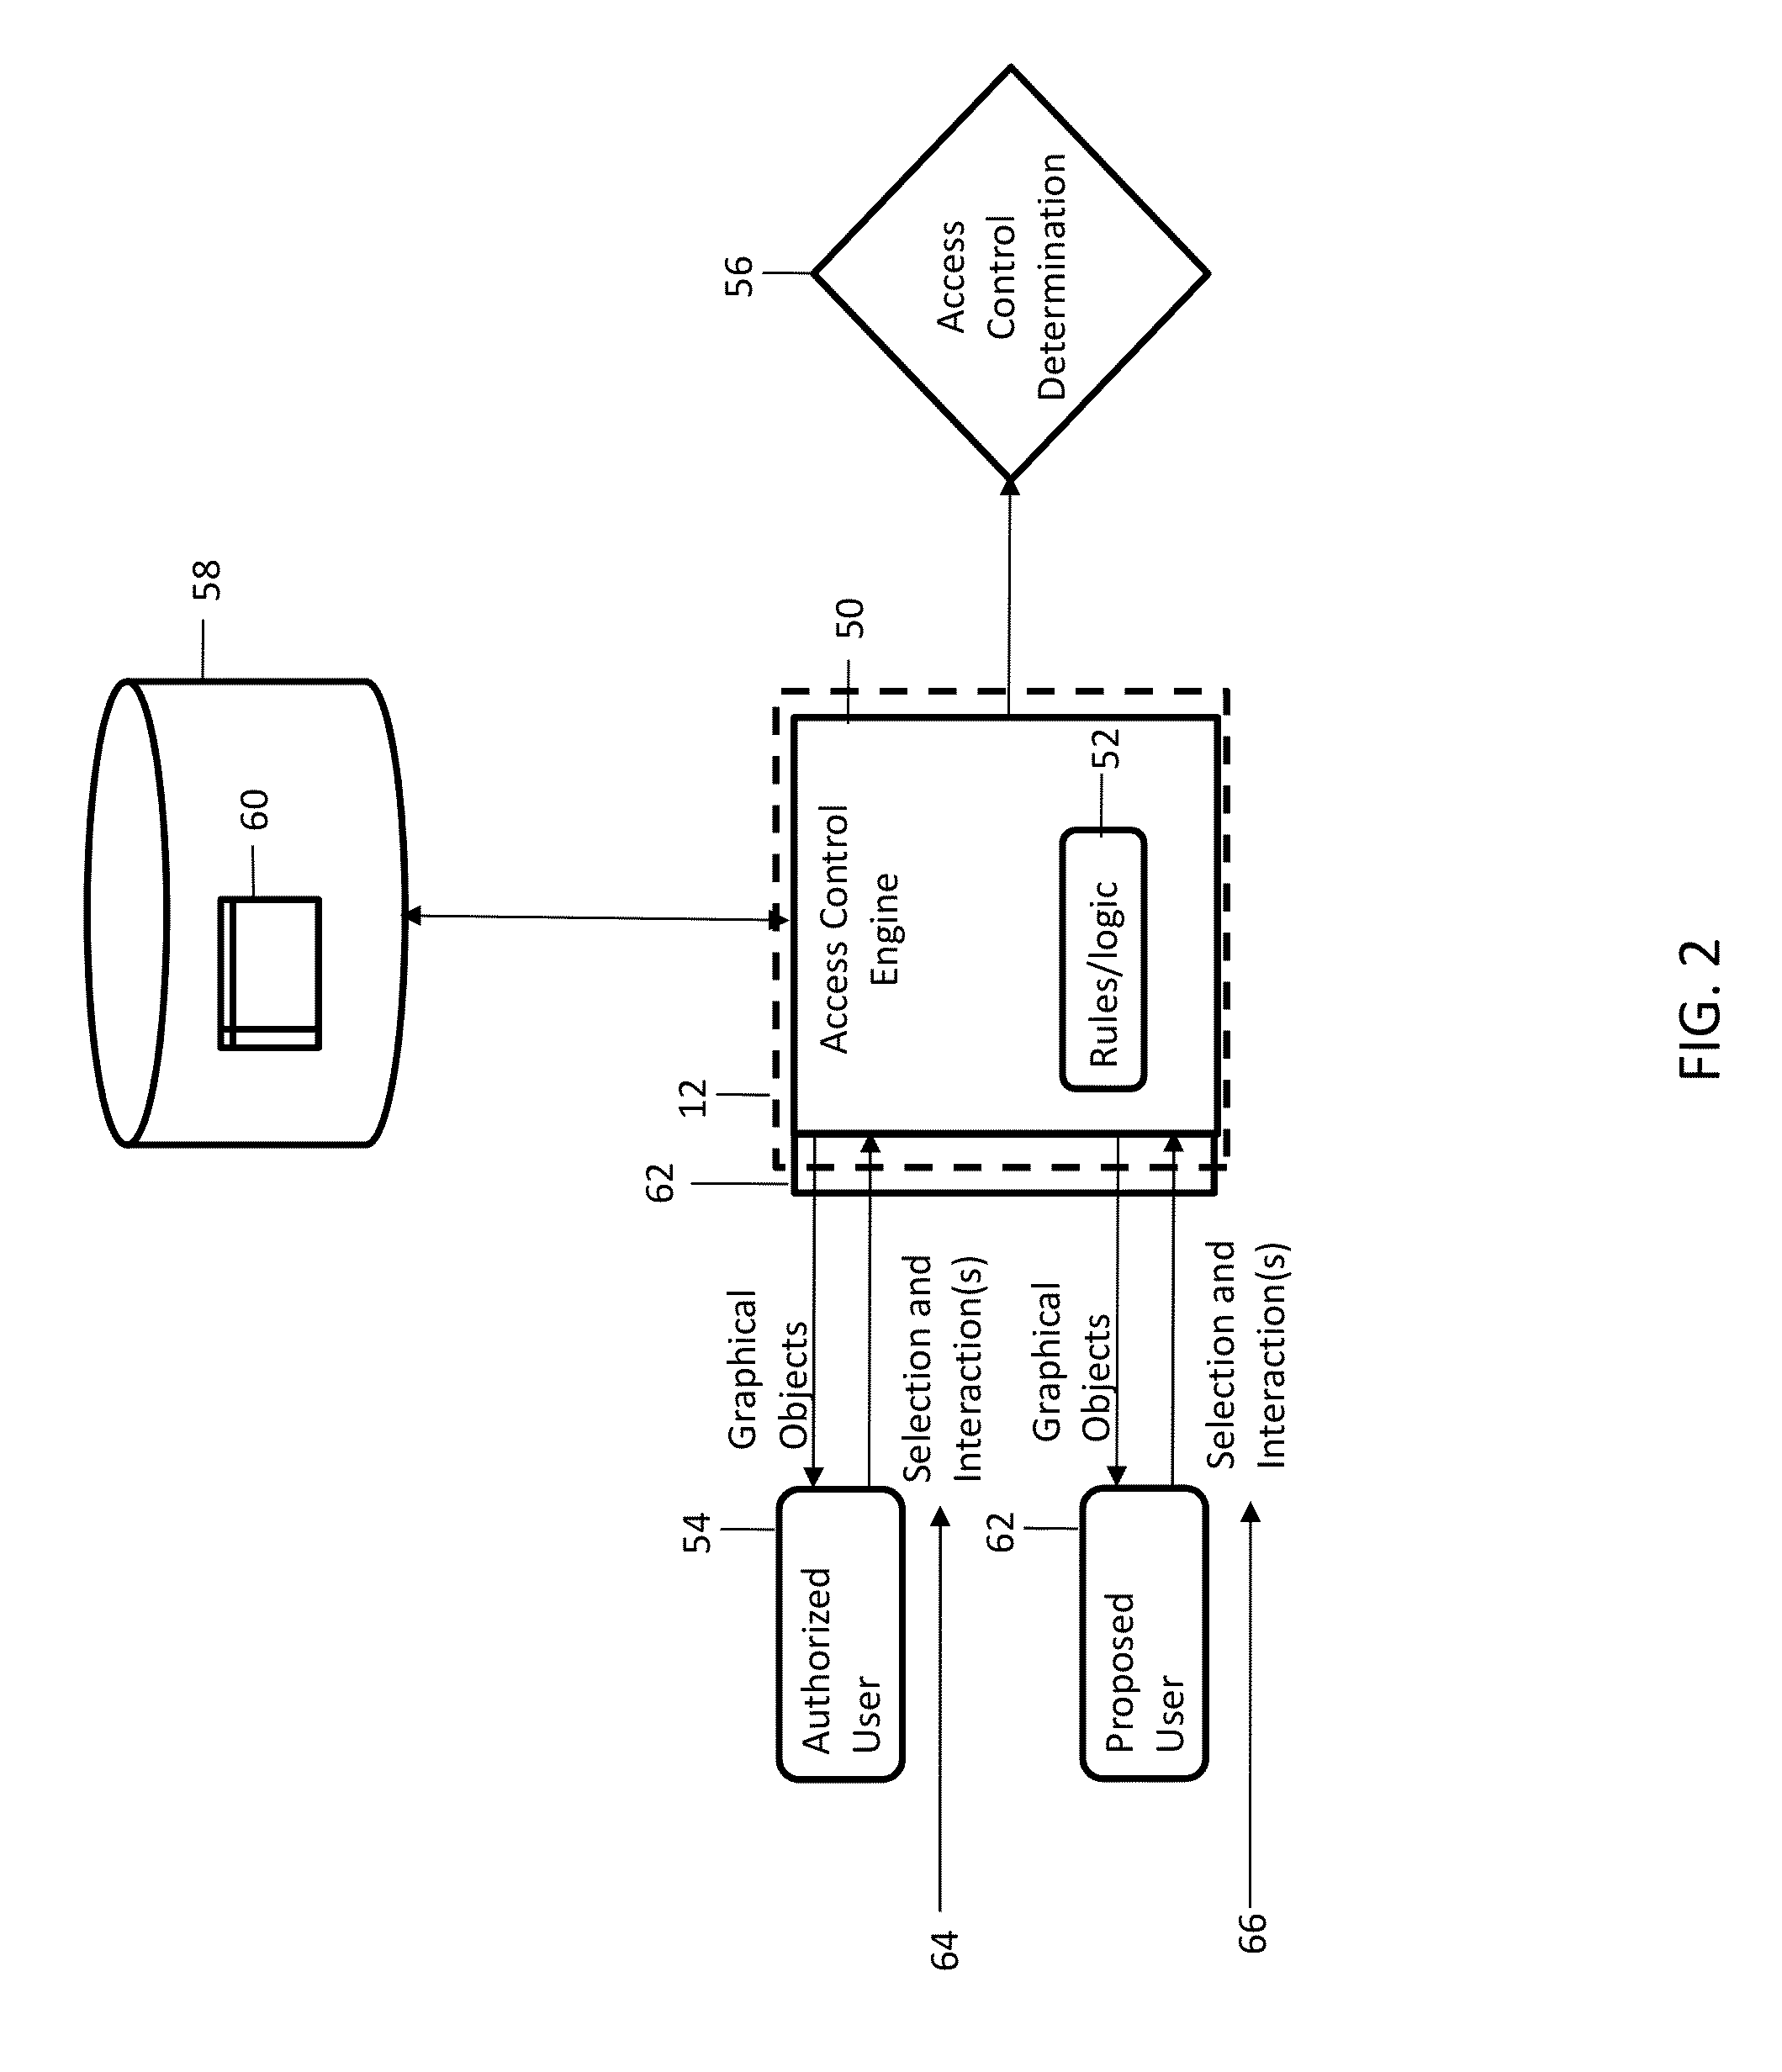 Graphical object-based user authentication for computerized devices